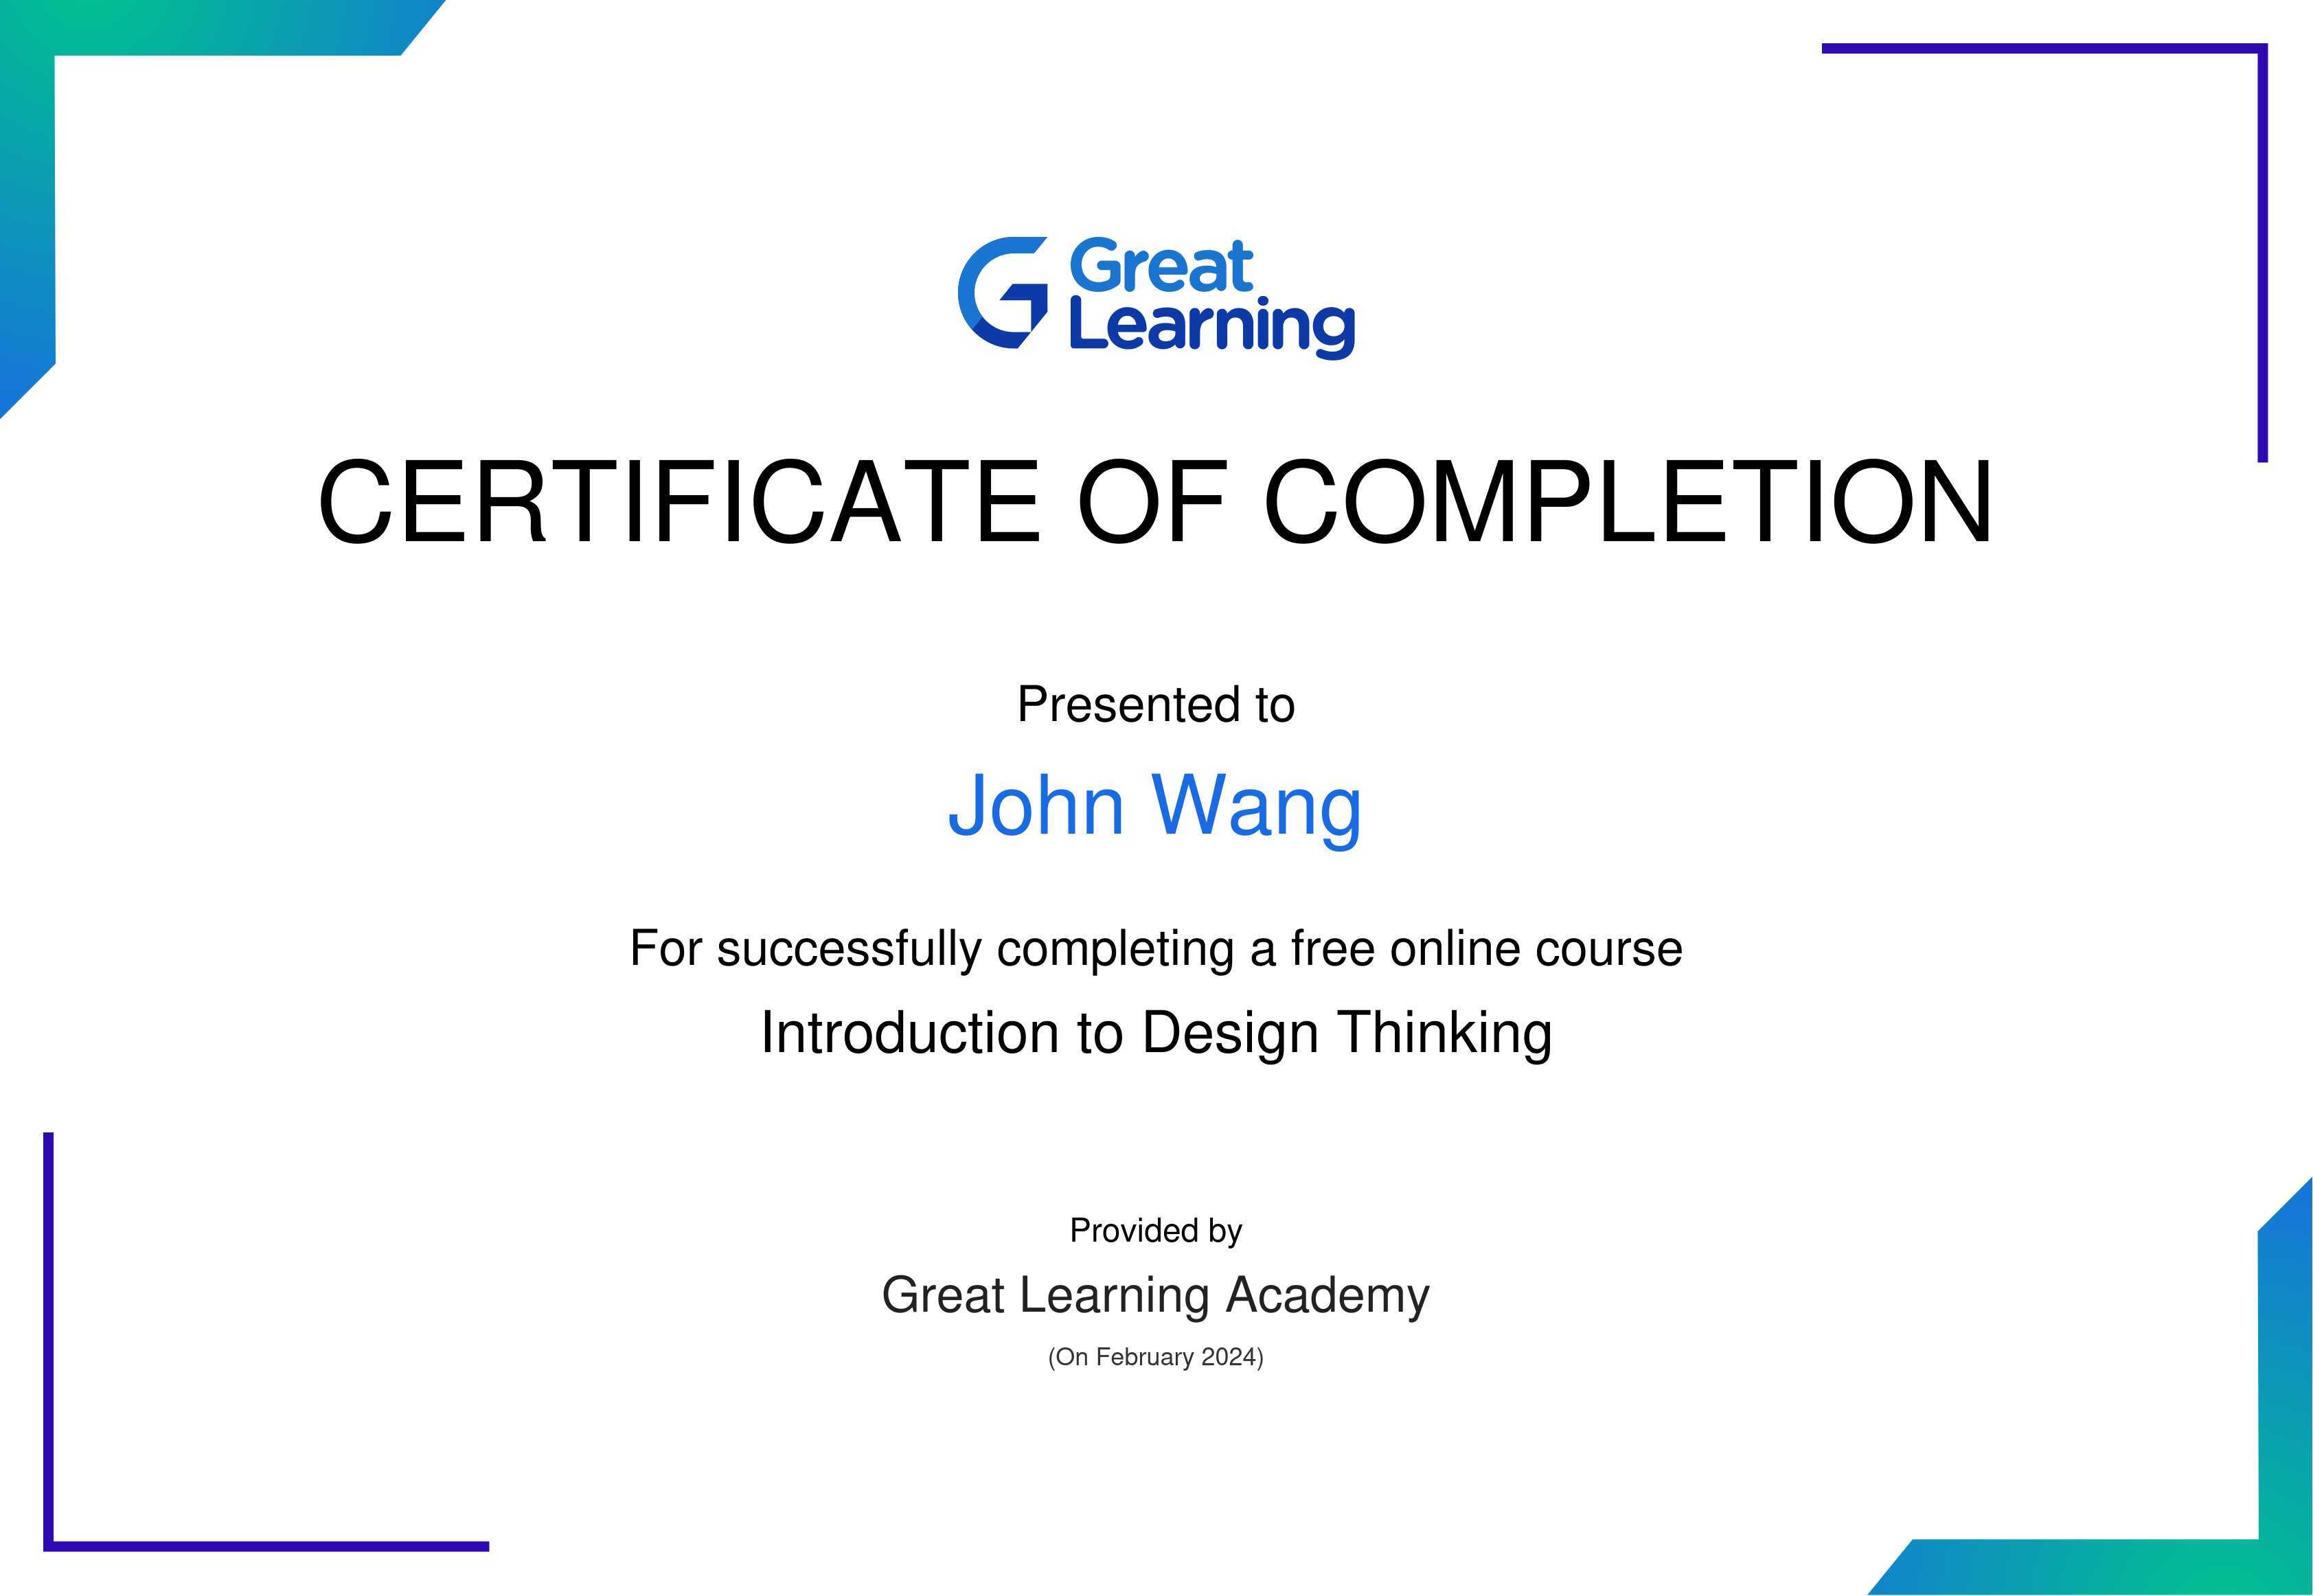 John's Introduction to Design Thinking from Great Learning Academy by Milind Kopikare